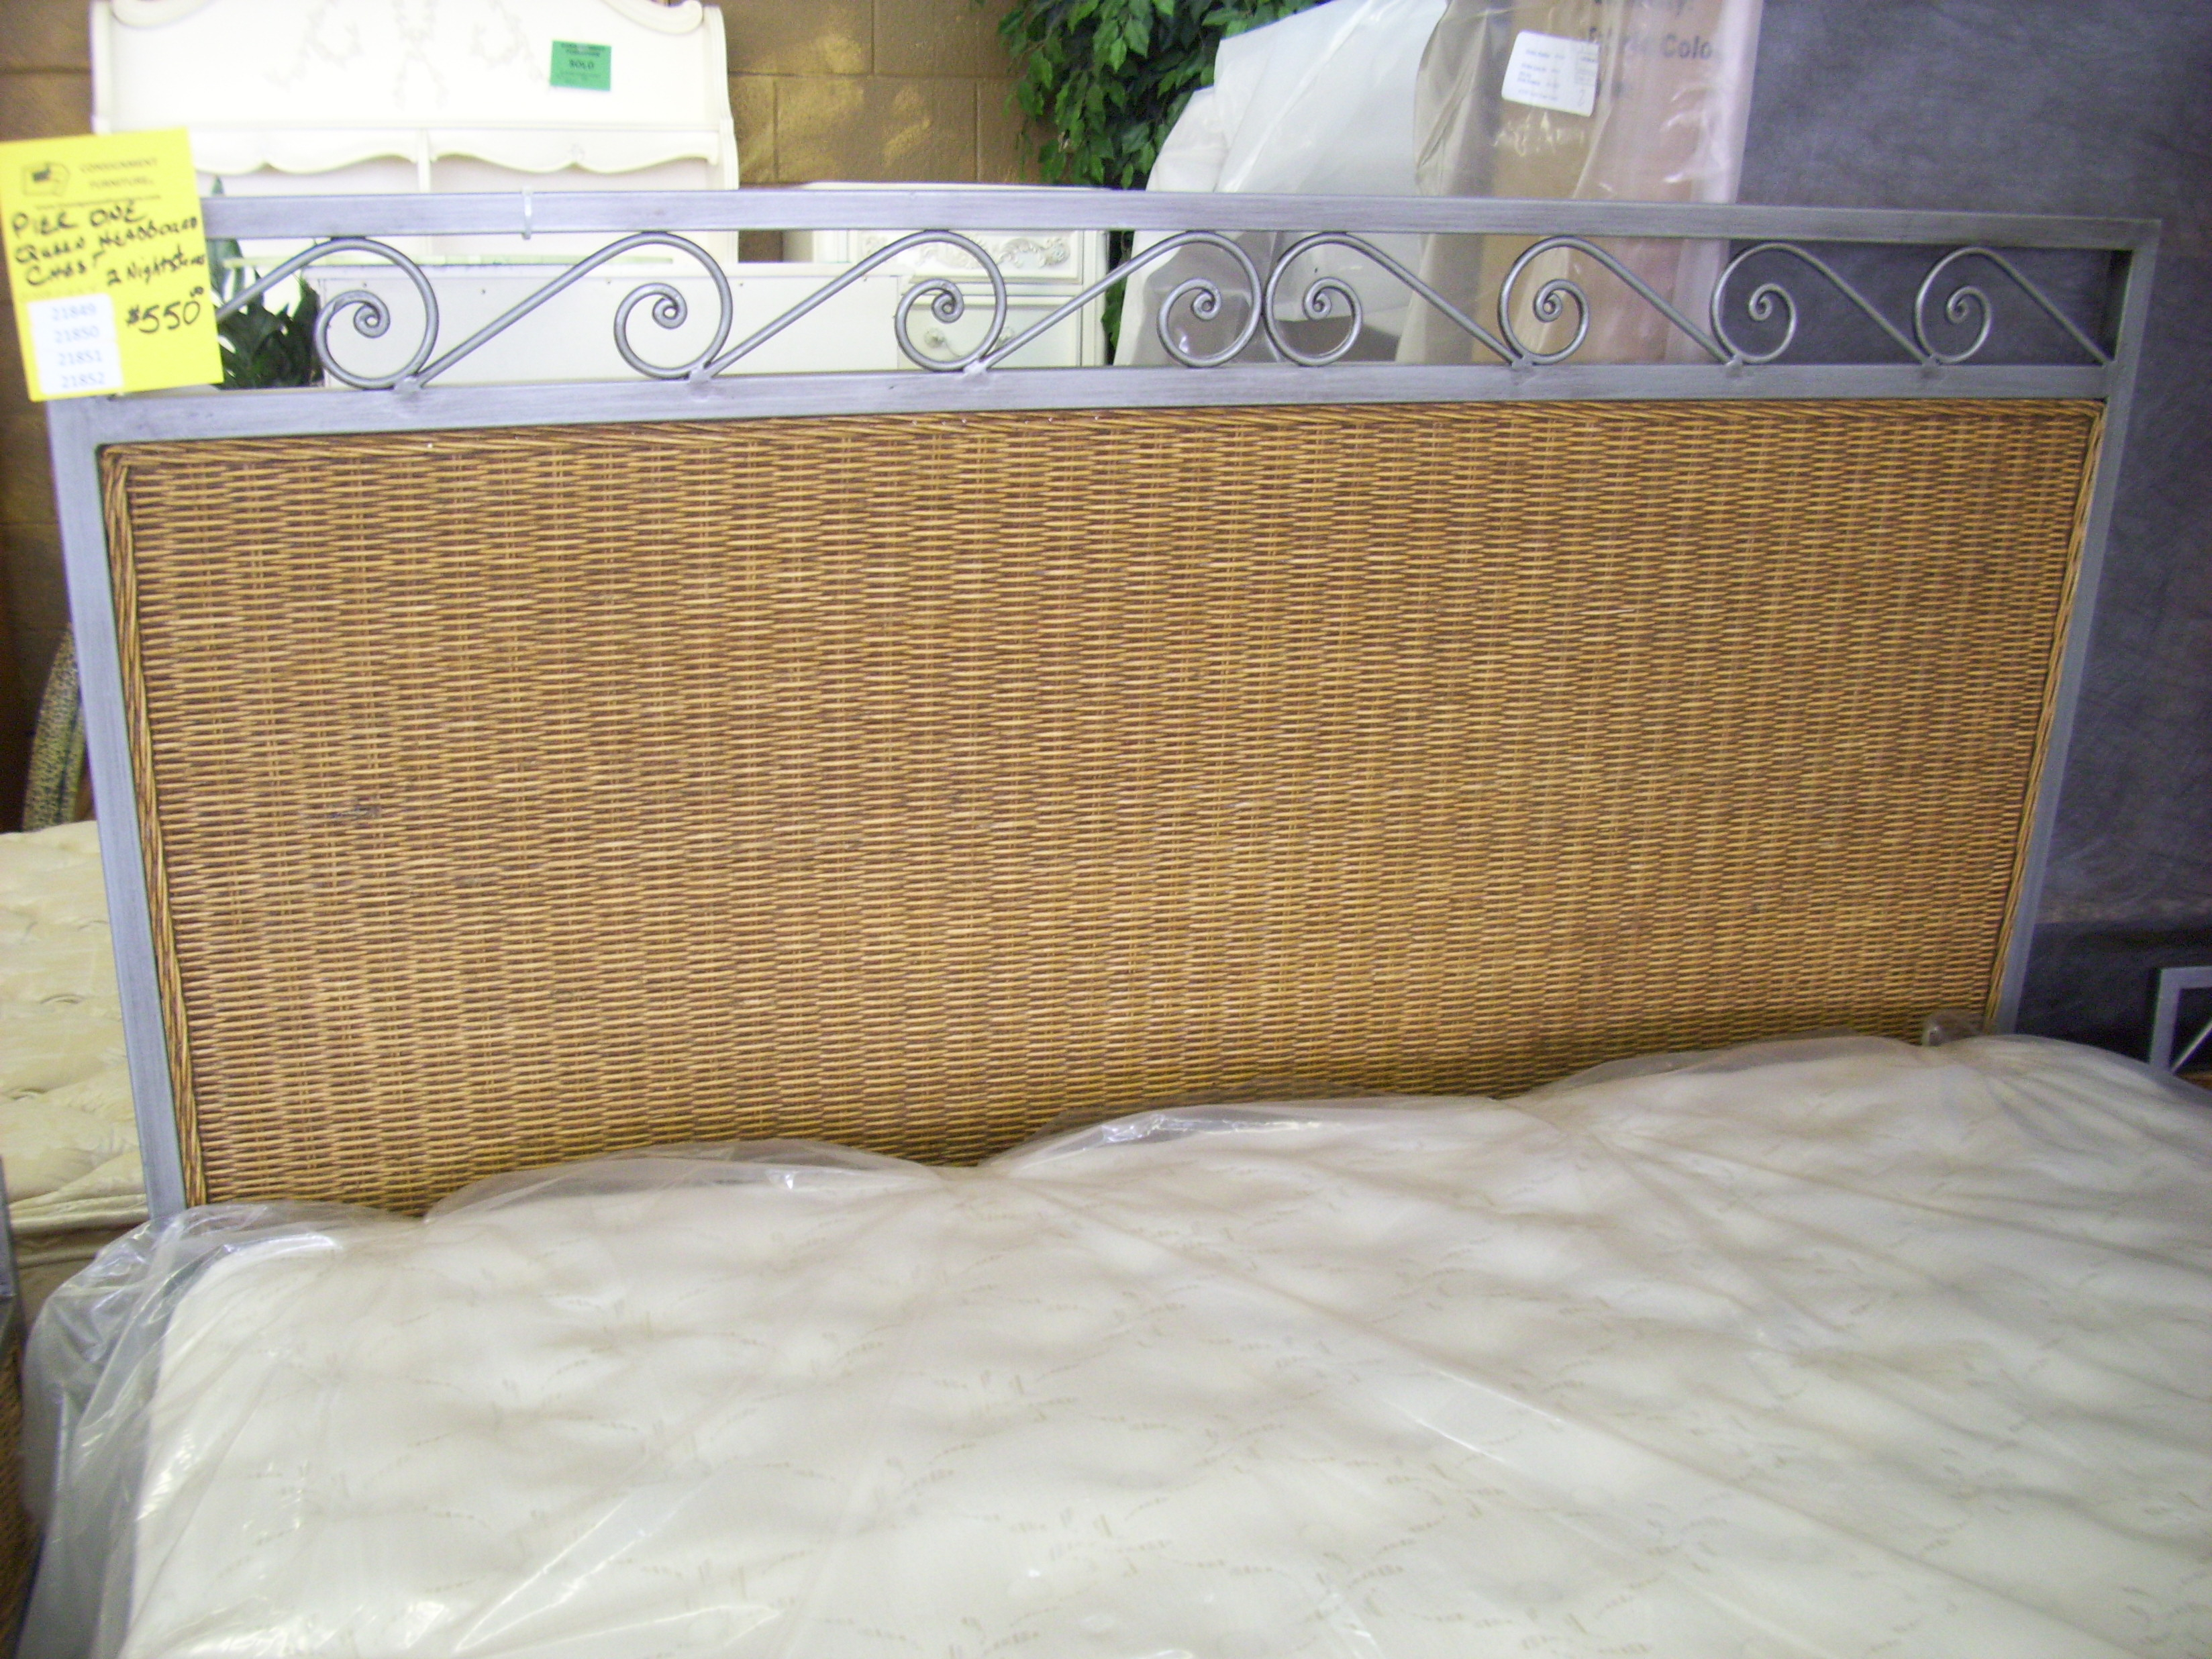 Likable White Wicker Bedroom Set Collectibles Sold Furniture with proportions 3296 X 2472